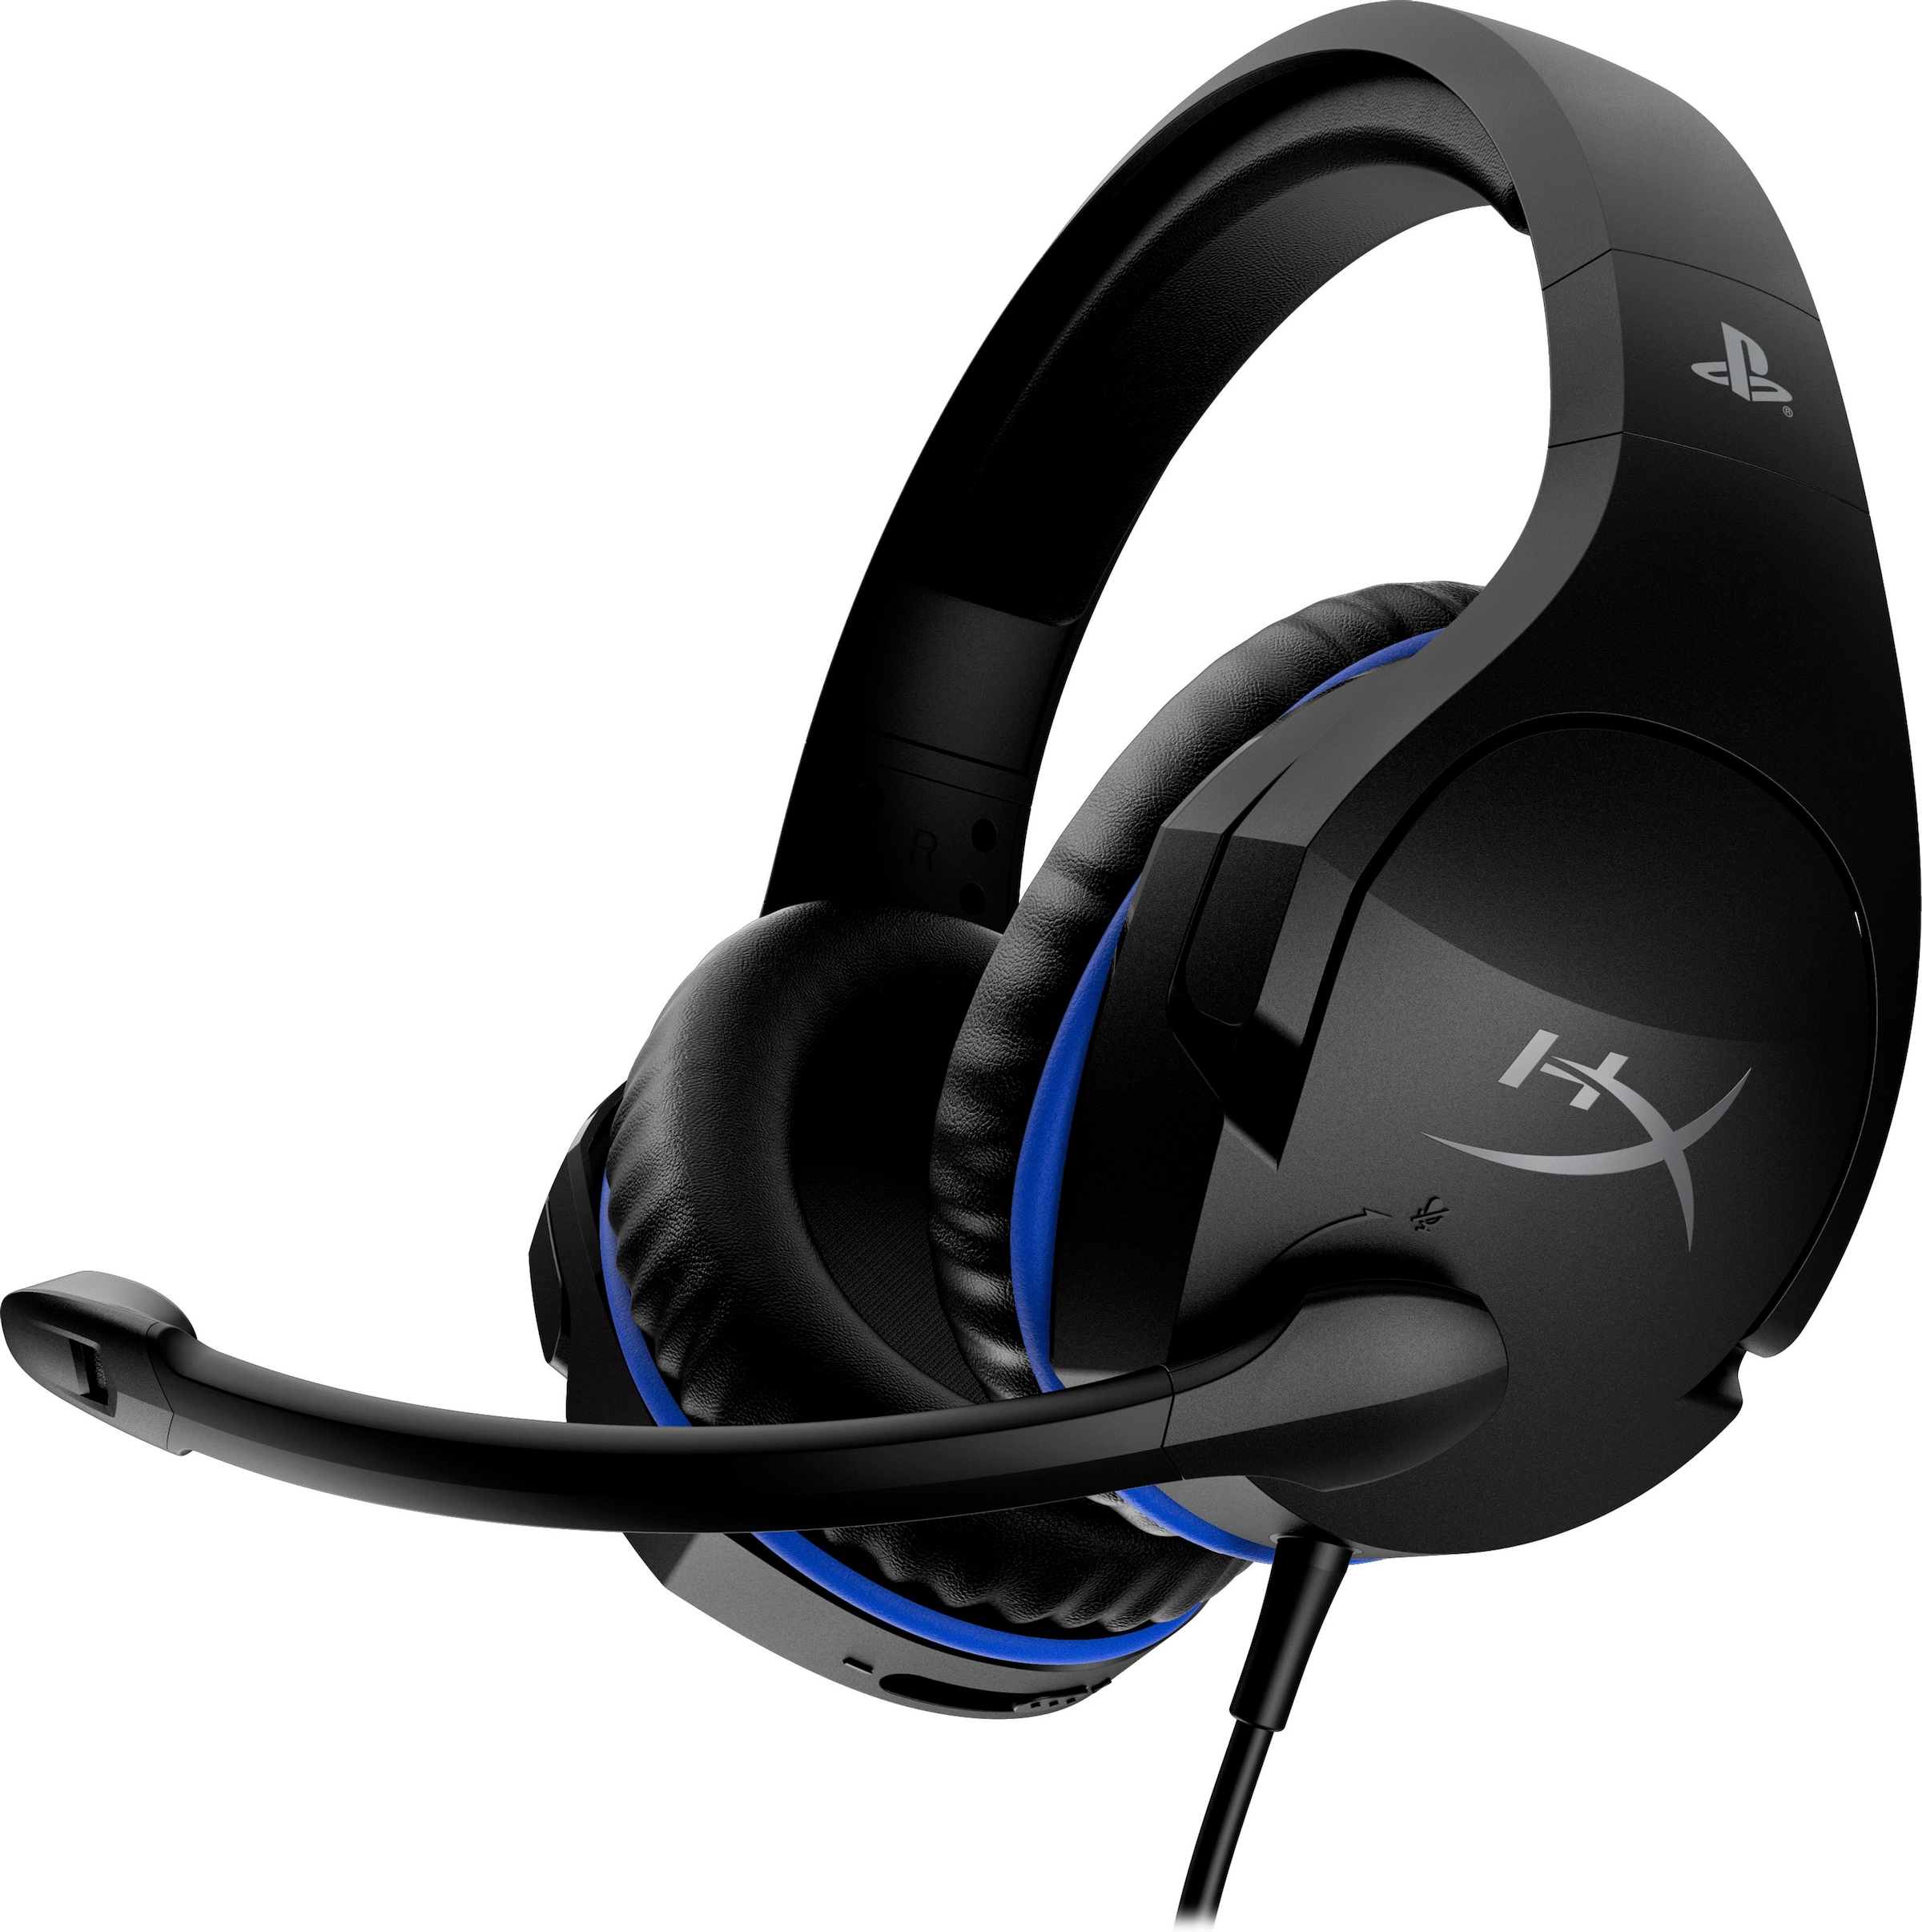 HyperX Gaming-Headset »Cloud Stinger bei abnehmbar Licensed)«, OTTO jetzt (PS4 Mikrofon